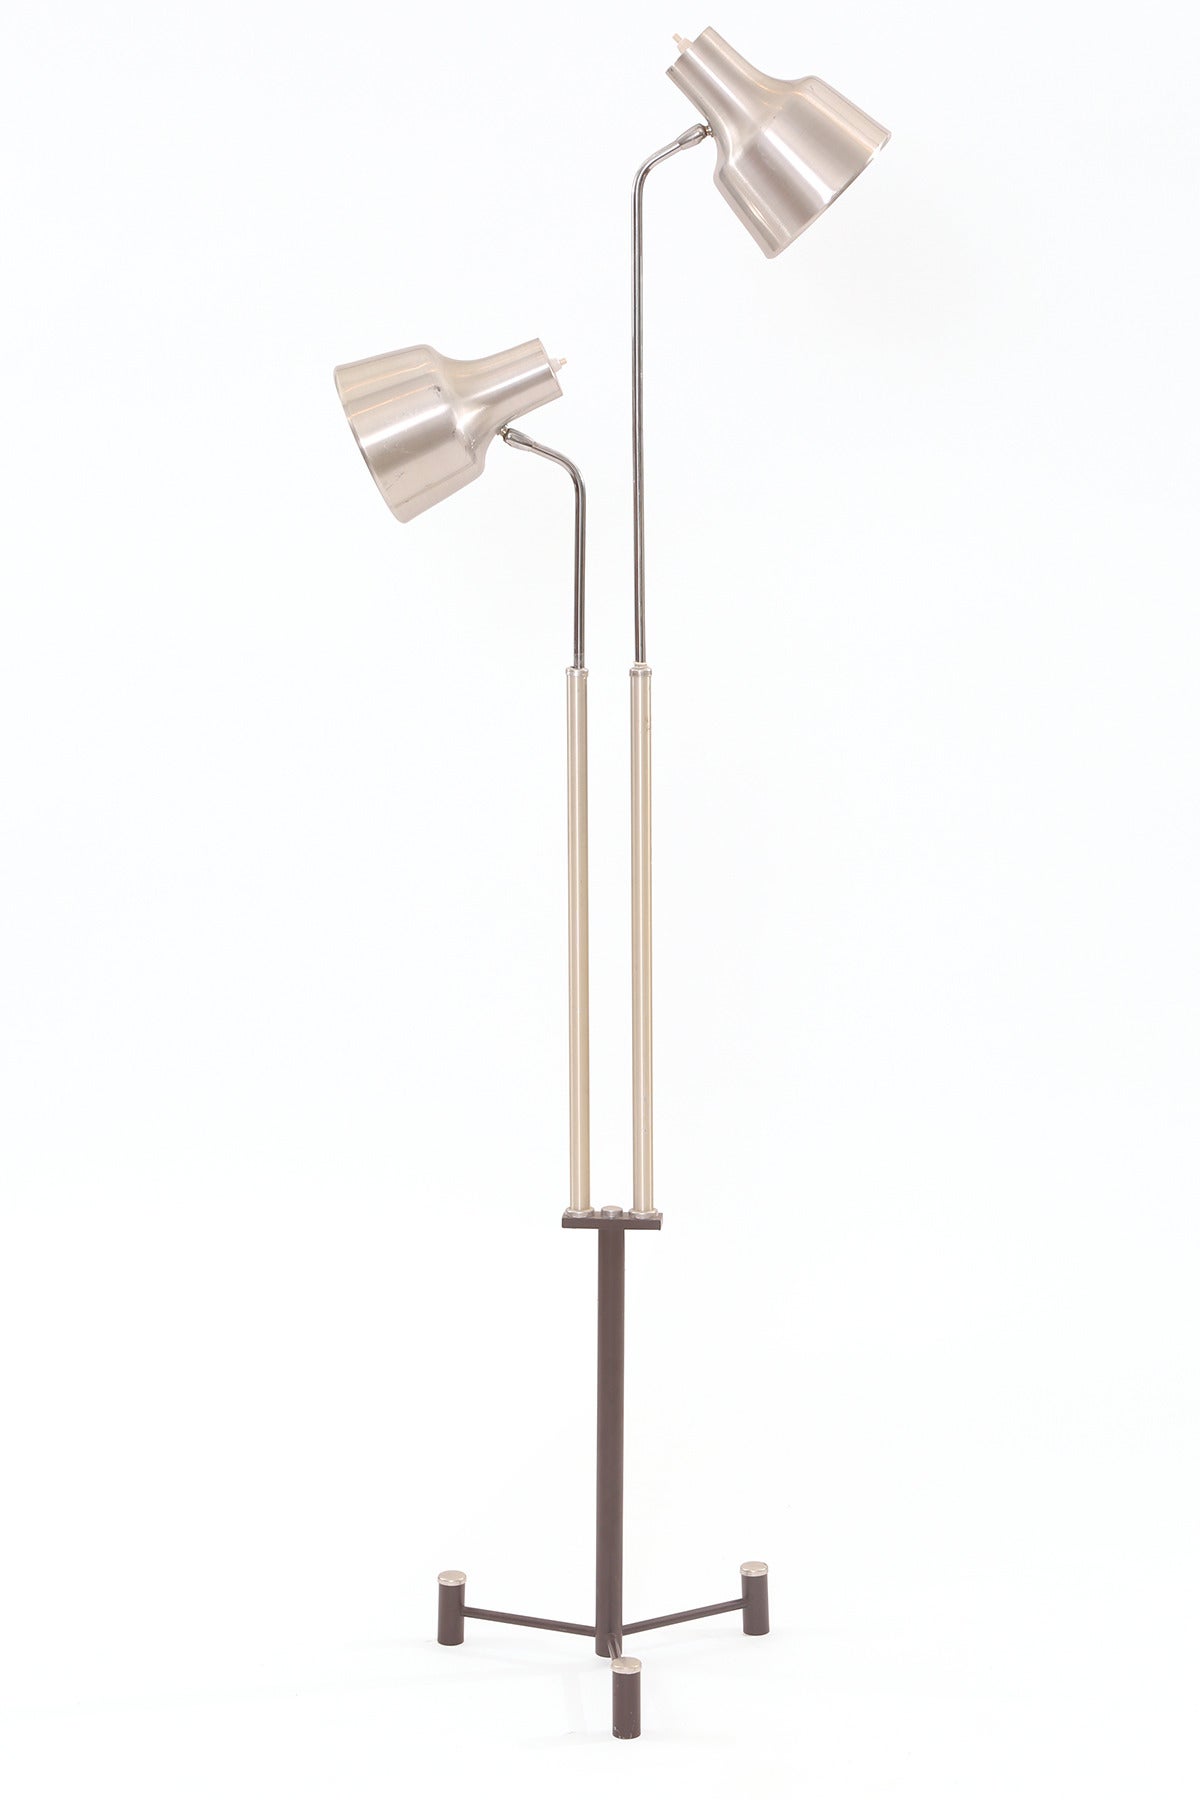 Aluminum and steel floor lamp from Denmark, circa mid-1960s. This example has pivoting satin finished aluminum cone heads. The height on each side is also adjustable. The tripod base is chocolate brown enamel and the lamp has been newly wired.